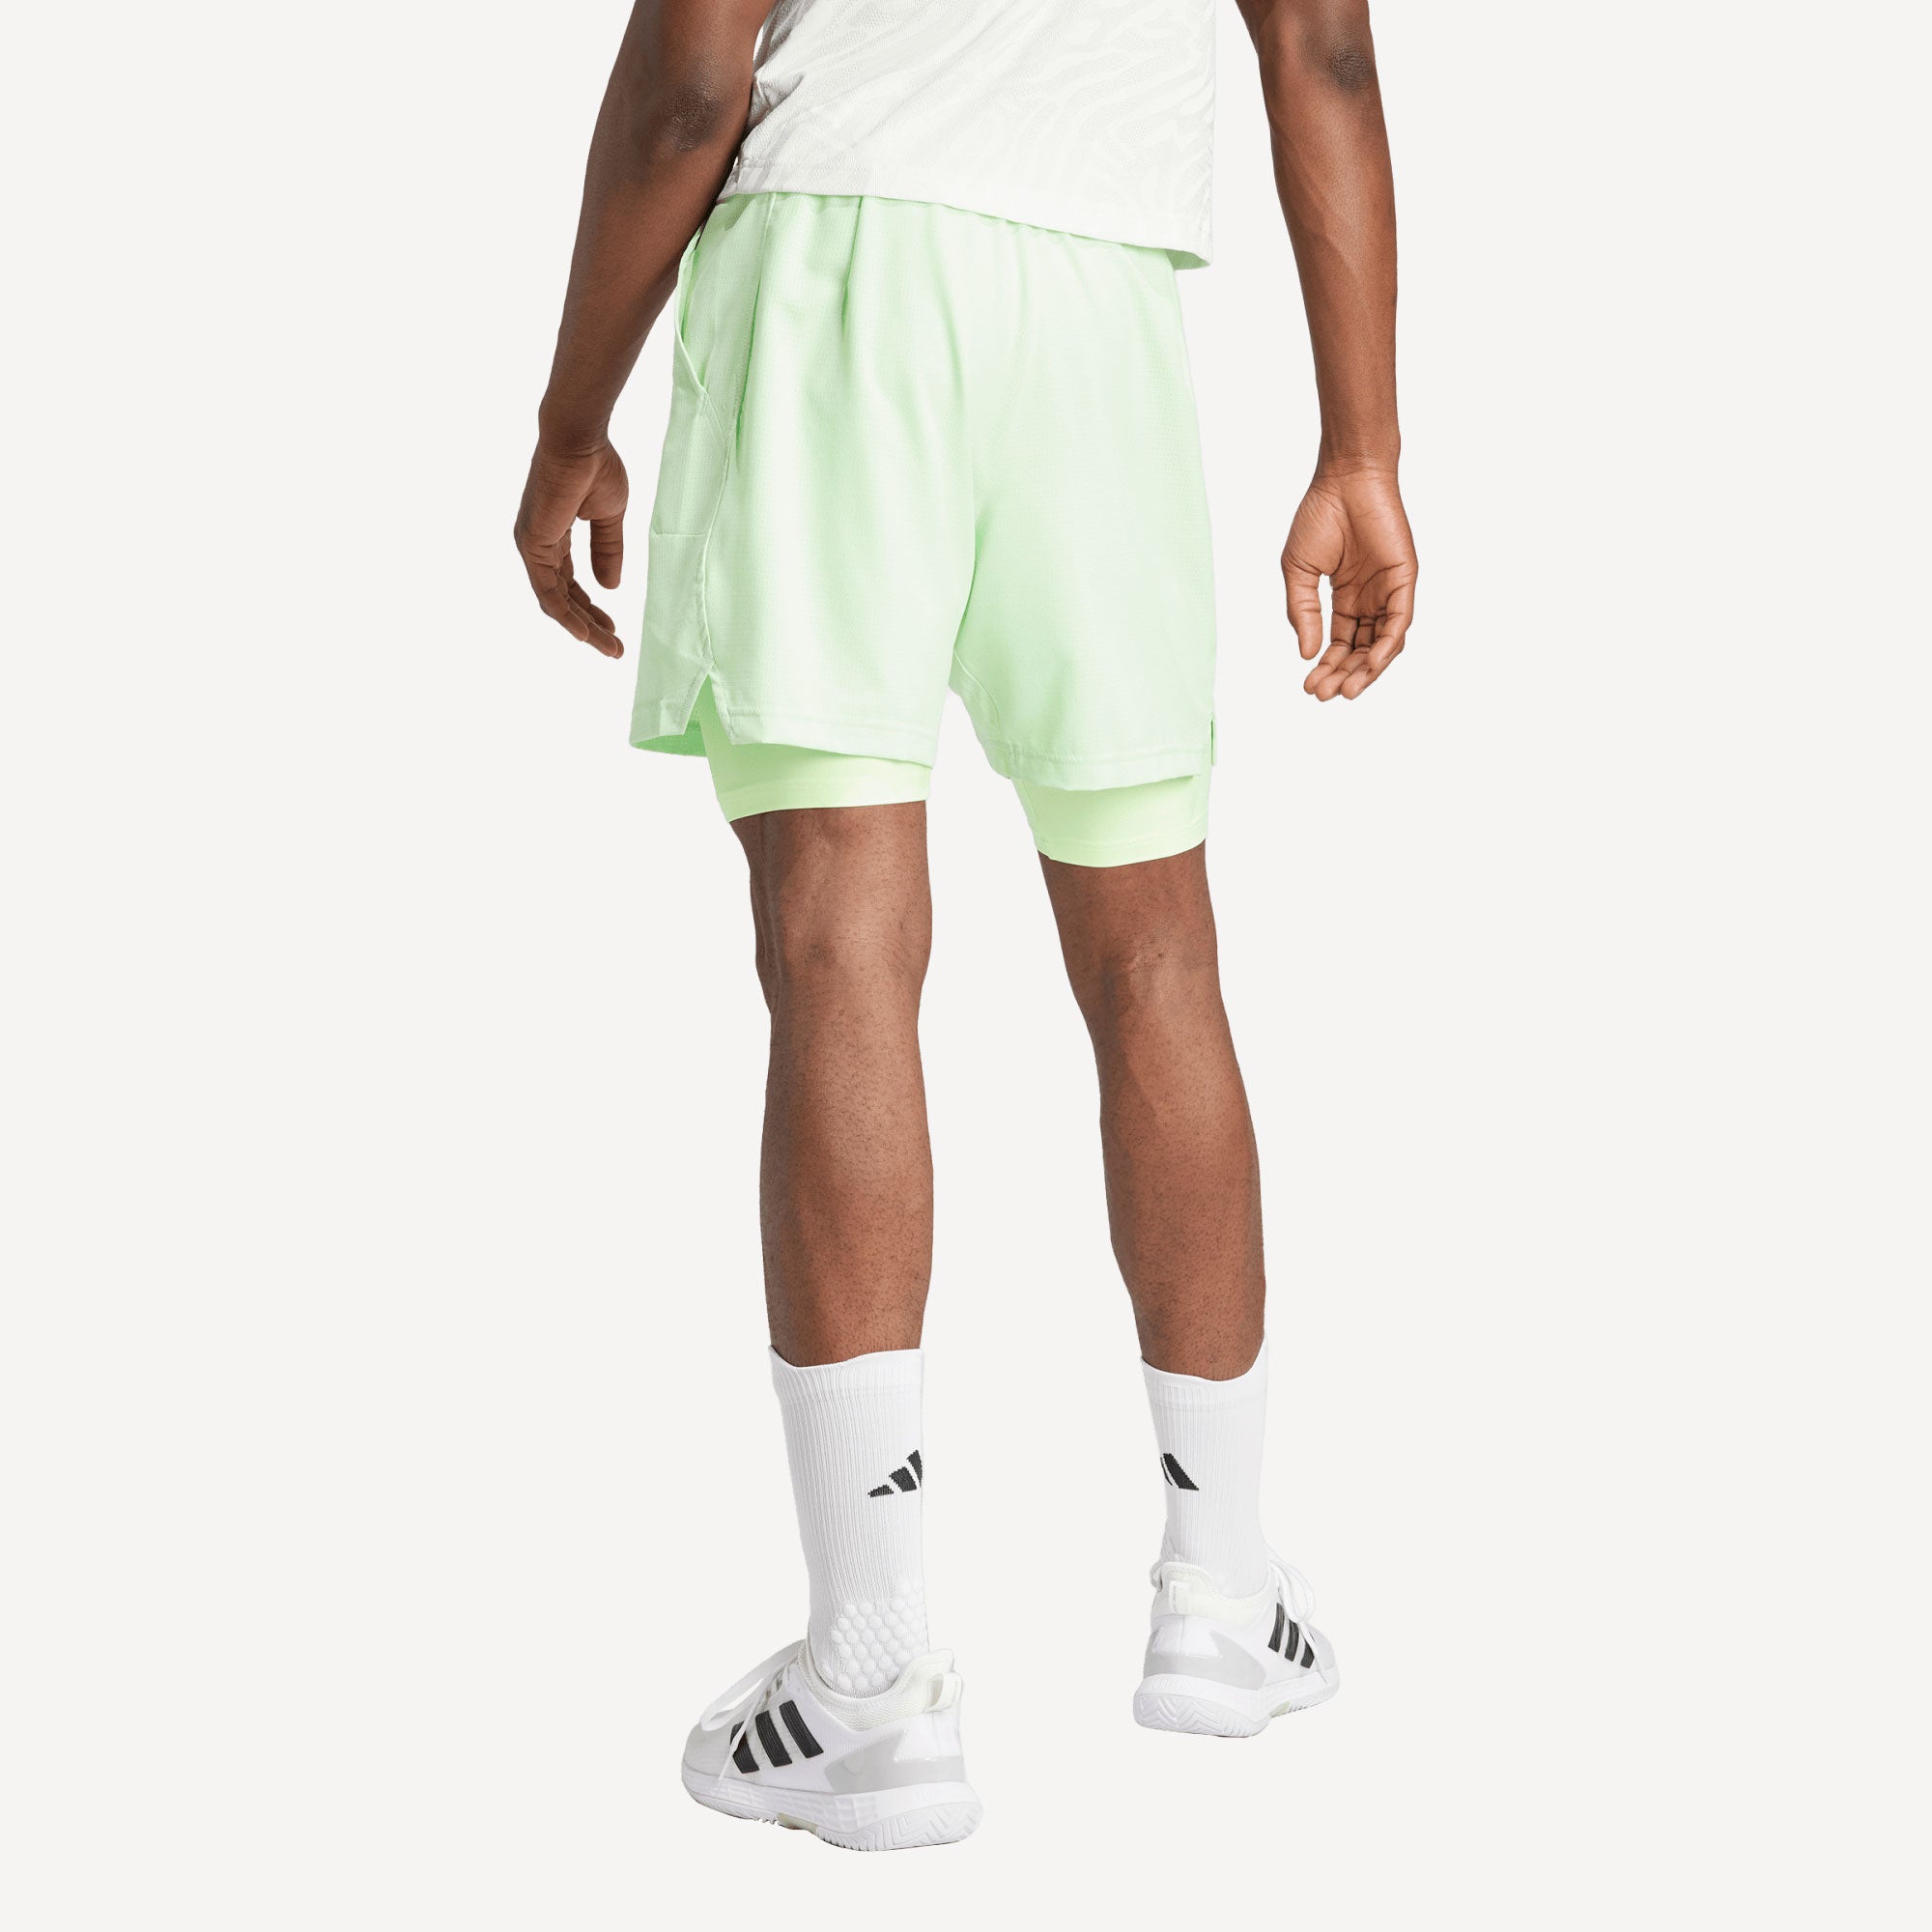 adidas Pro Melbourne Men's Tennis Shorts and Inner Shorts Set - Green (2)